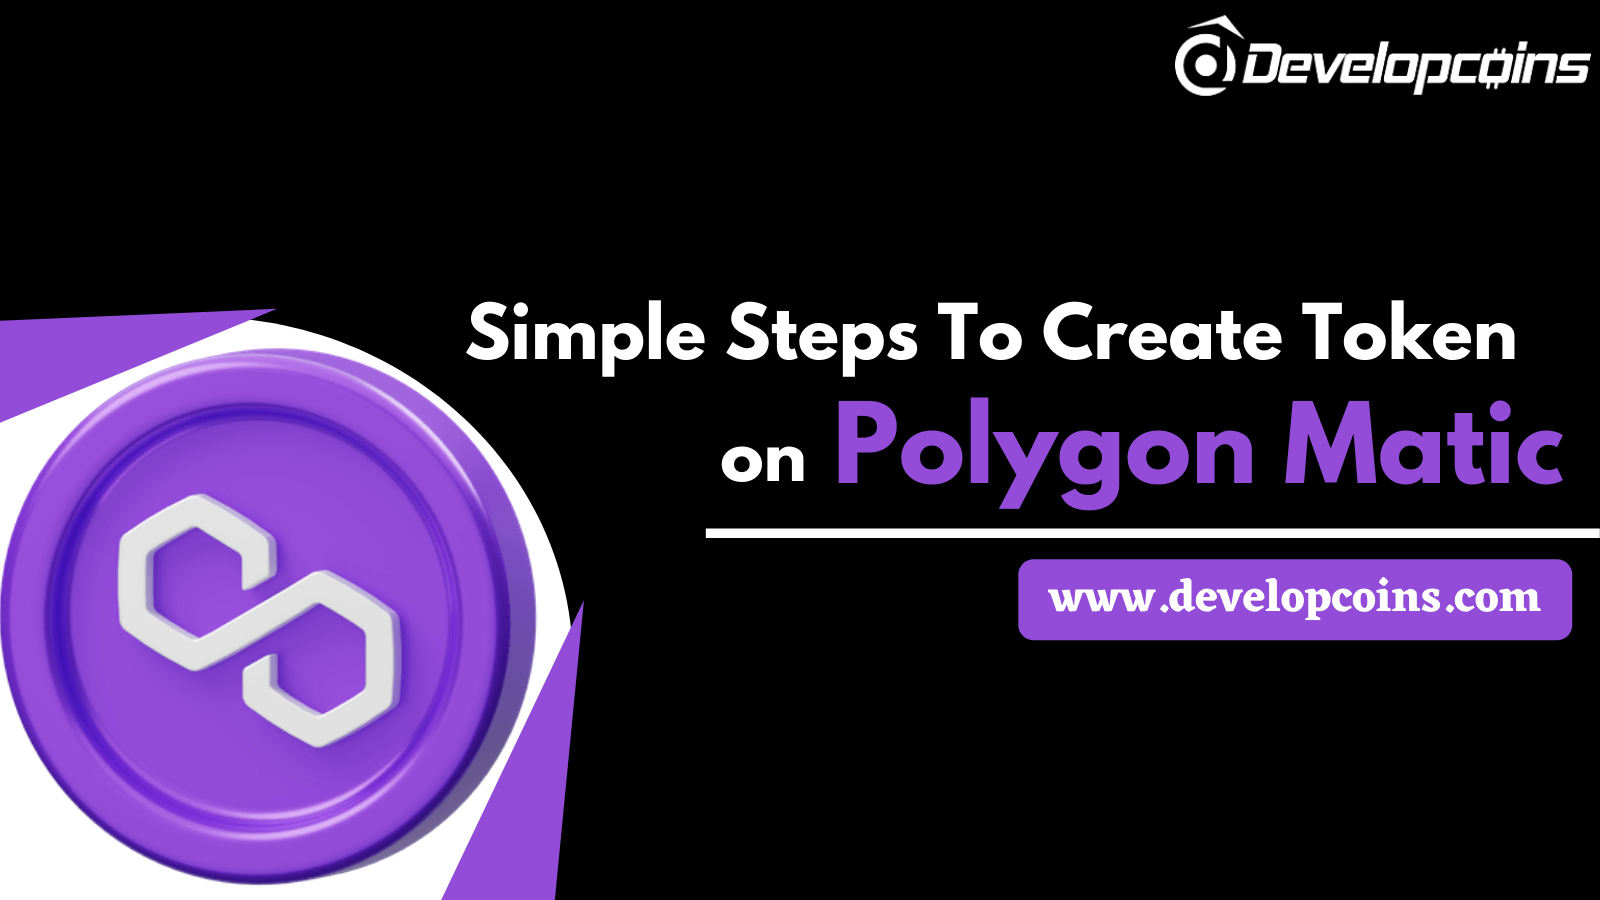 How to Create Token on Polygon Matic?